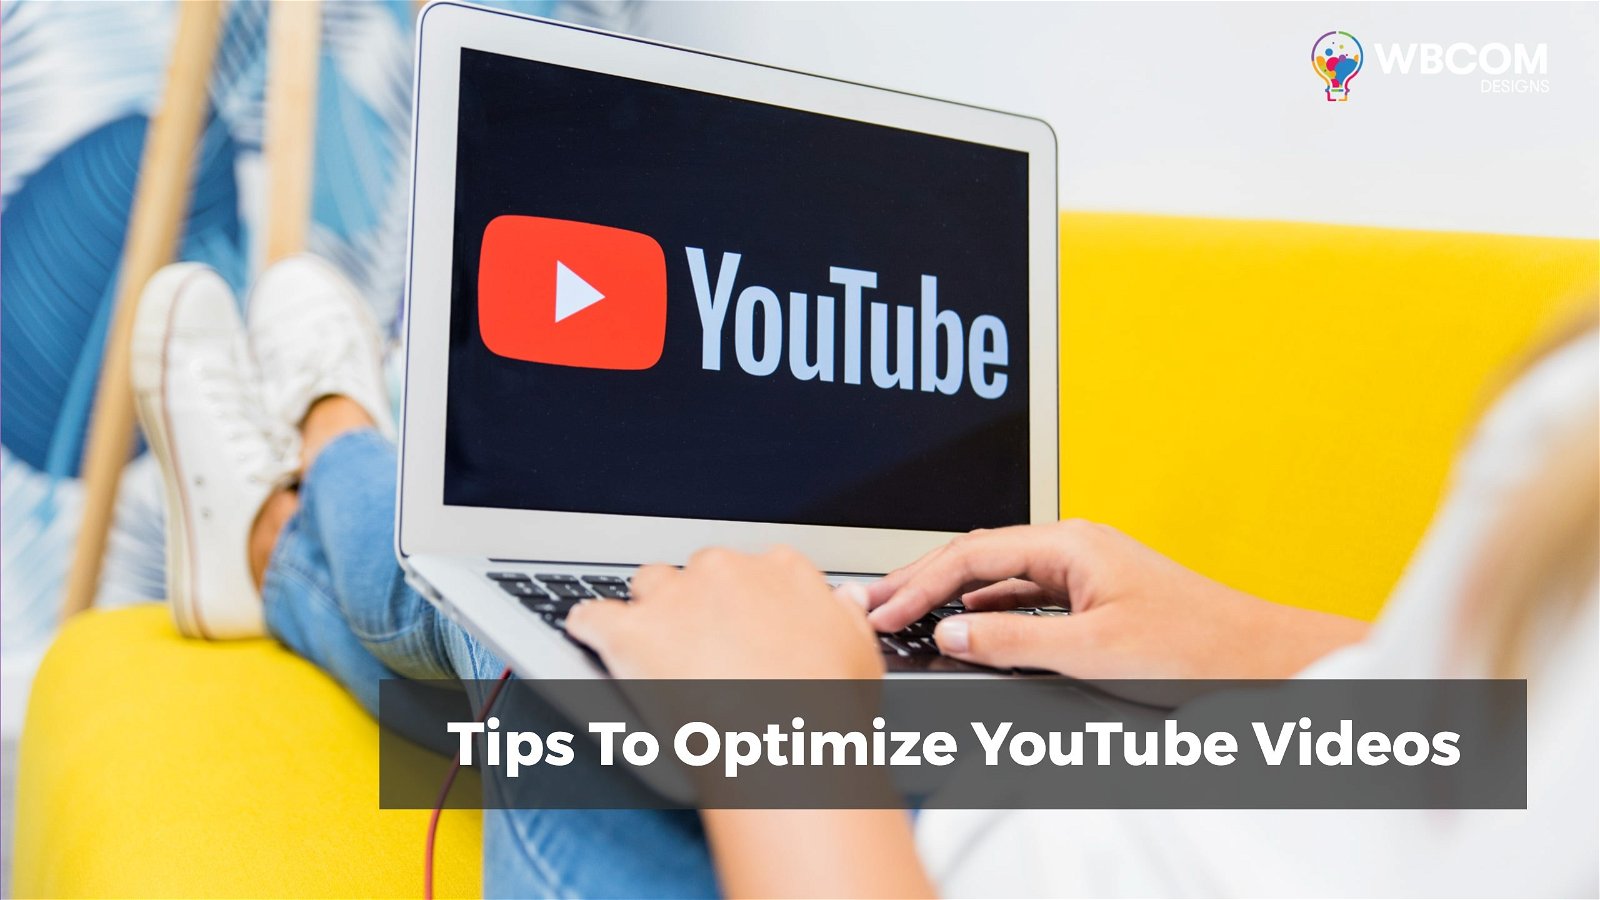 Tips To Optimize YouTube Videos